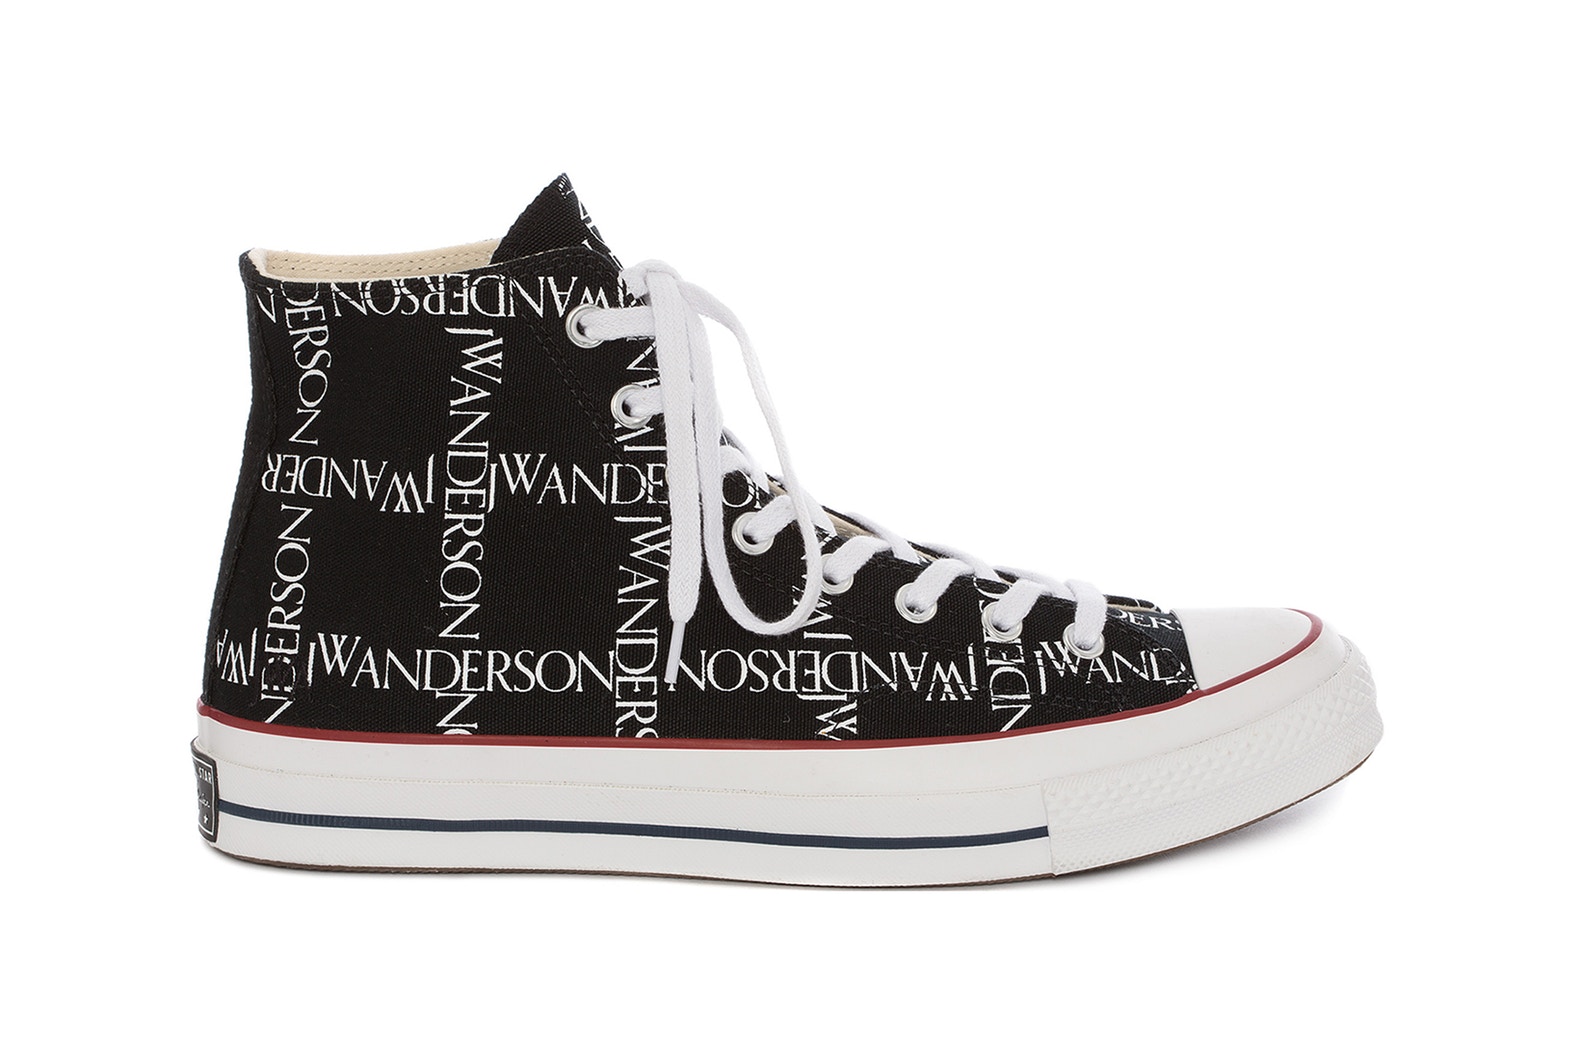 J.W. Anderson x Converse Announce Chuck Taylor All Star Collaborations